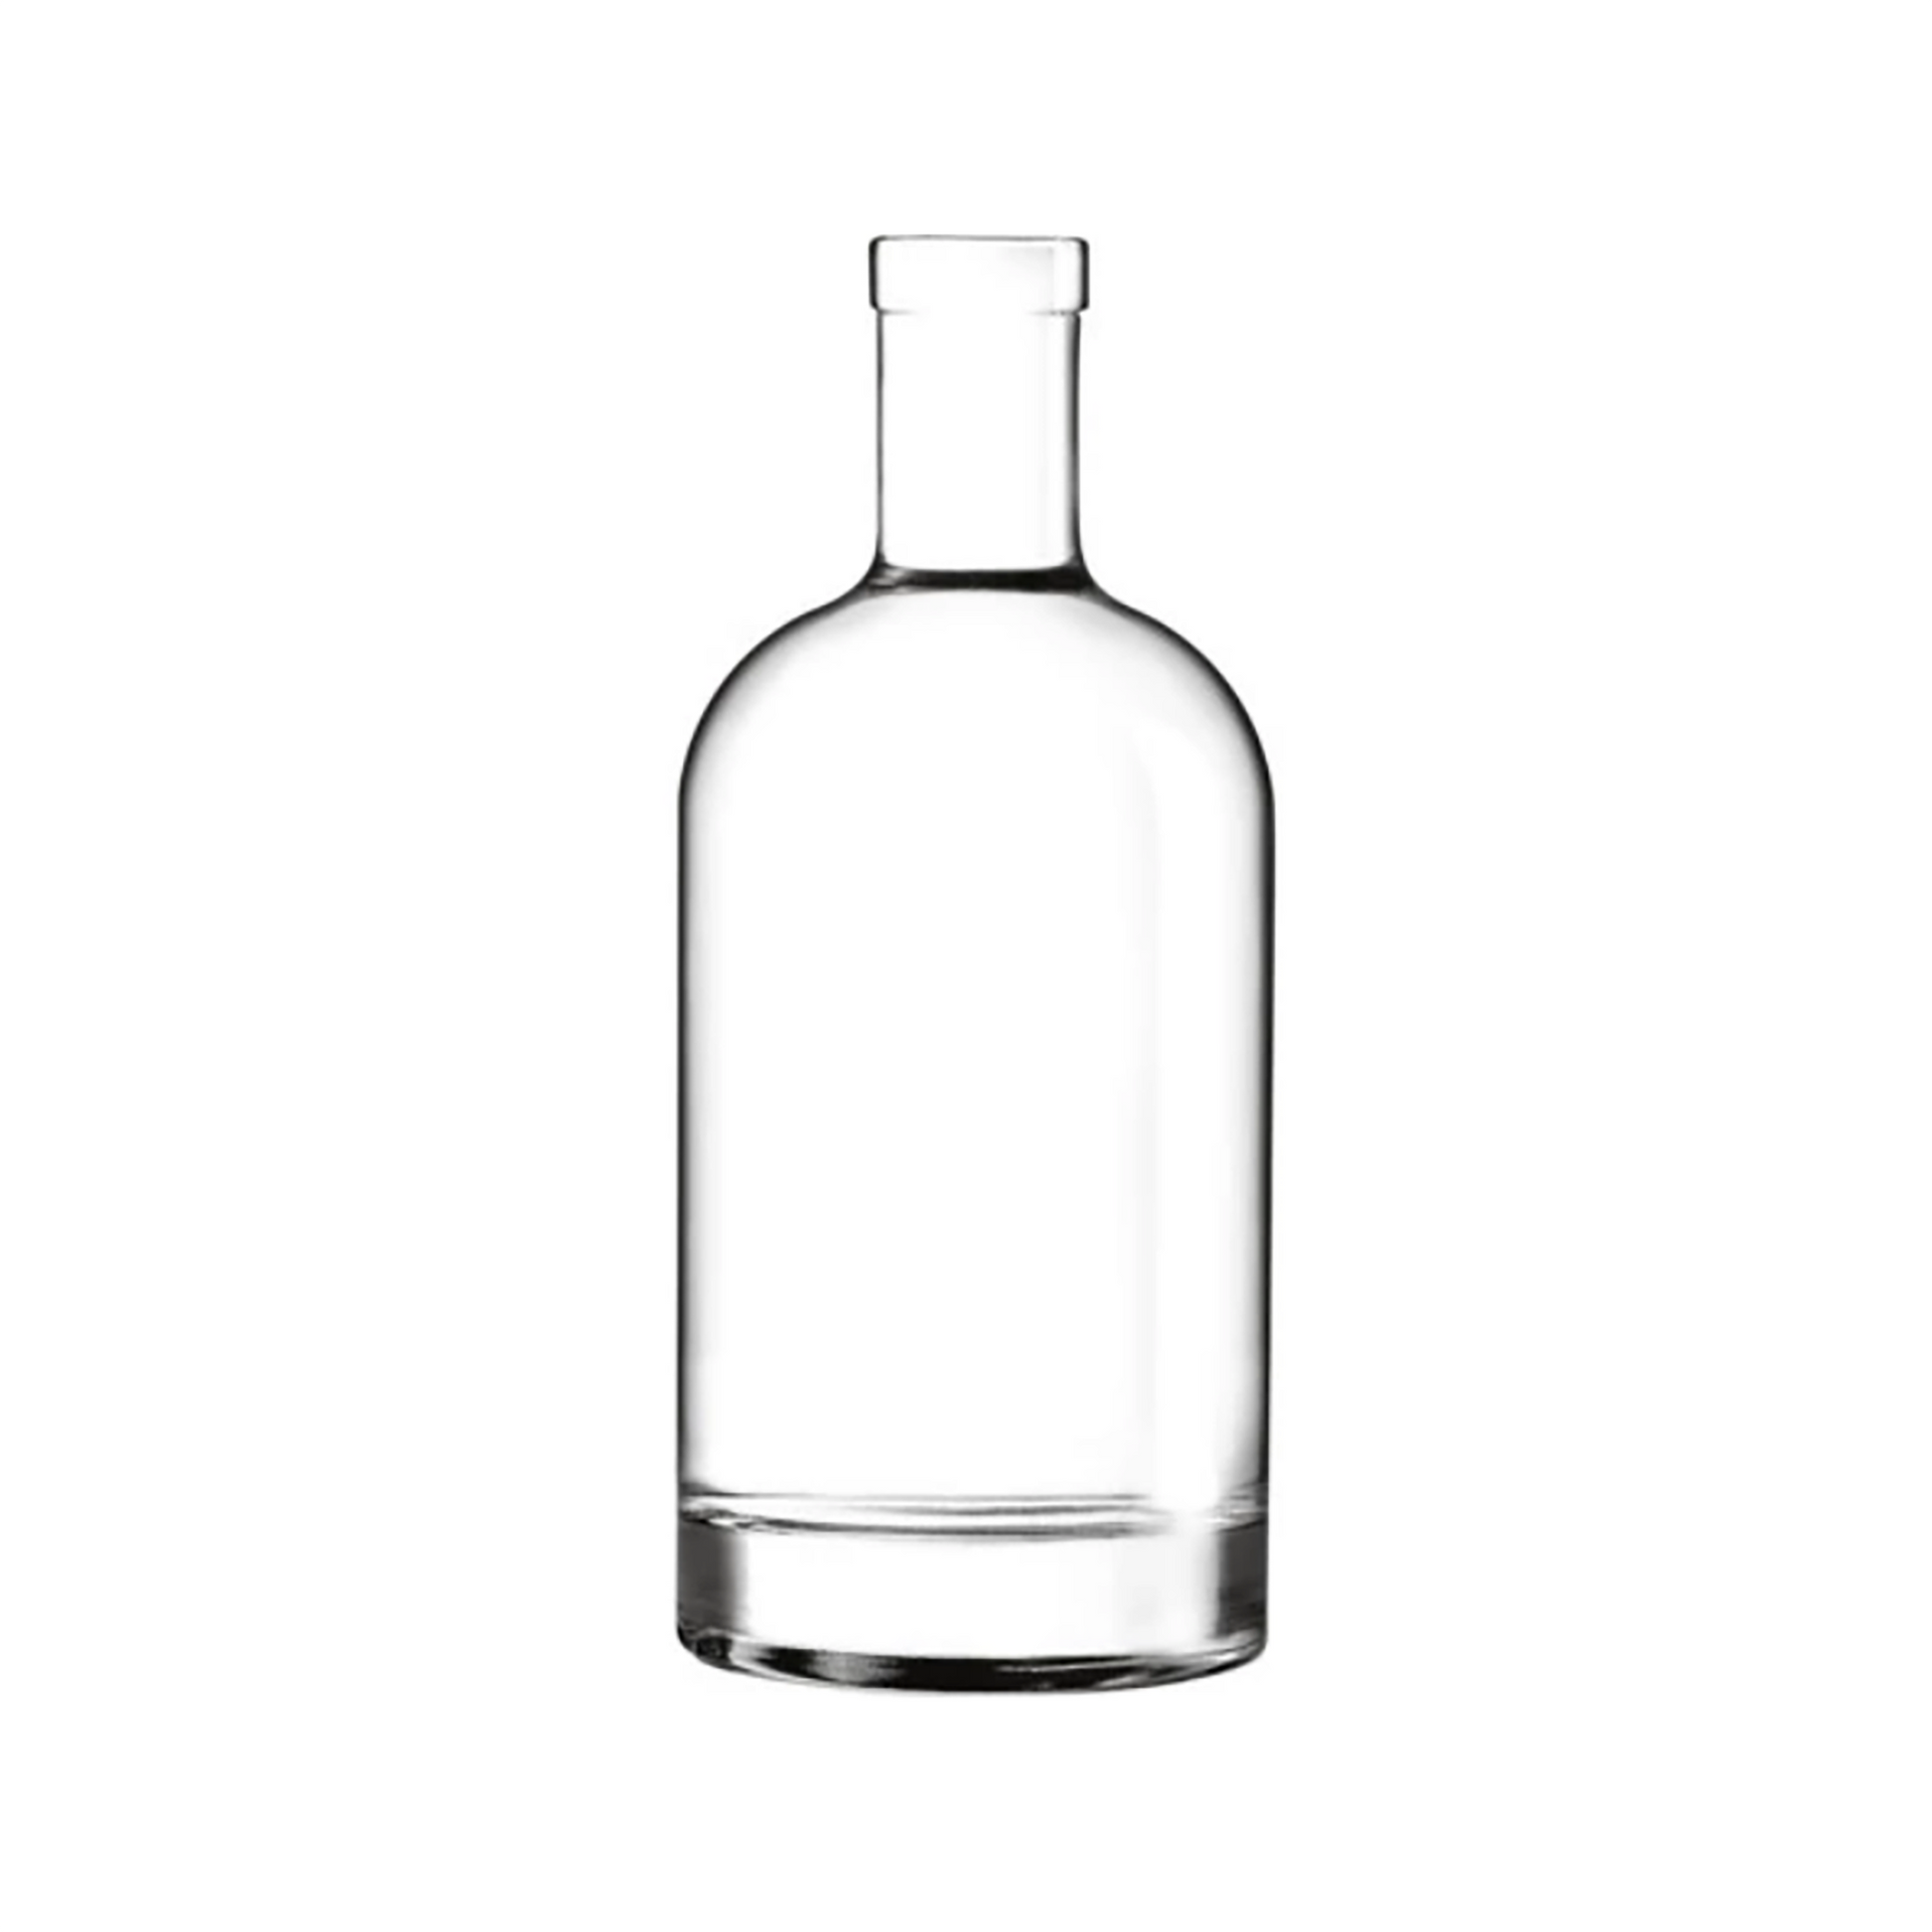 clear glass oslo spirit bottle with cork top